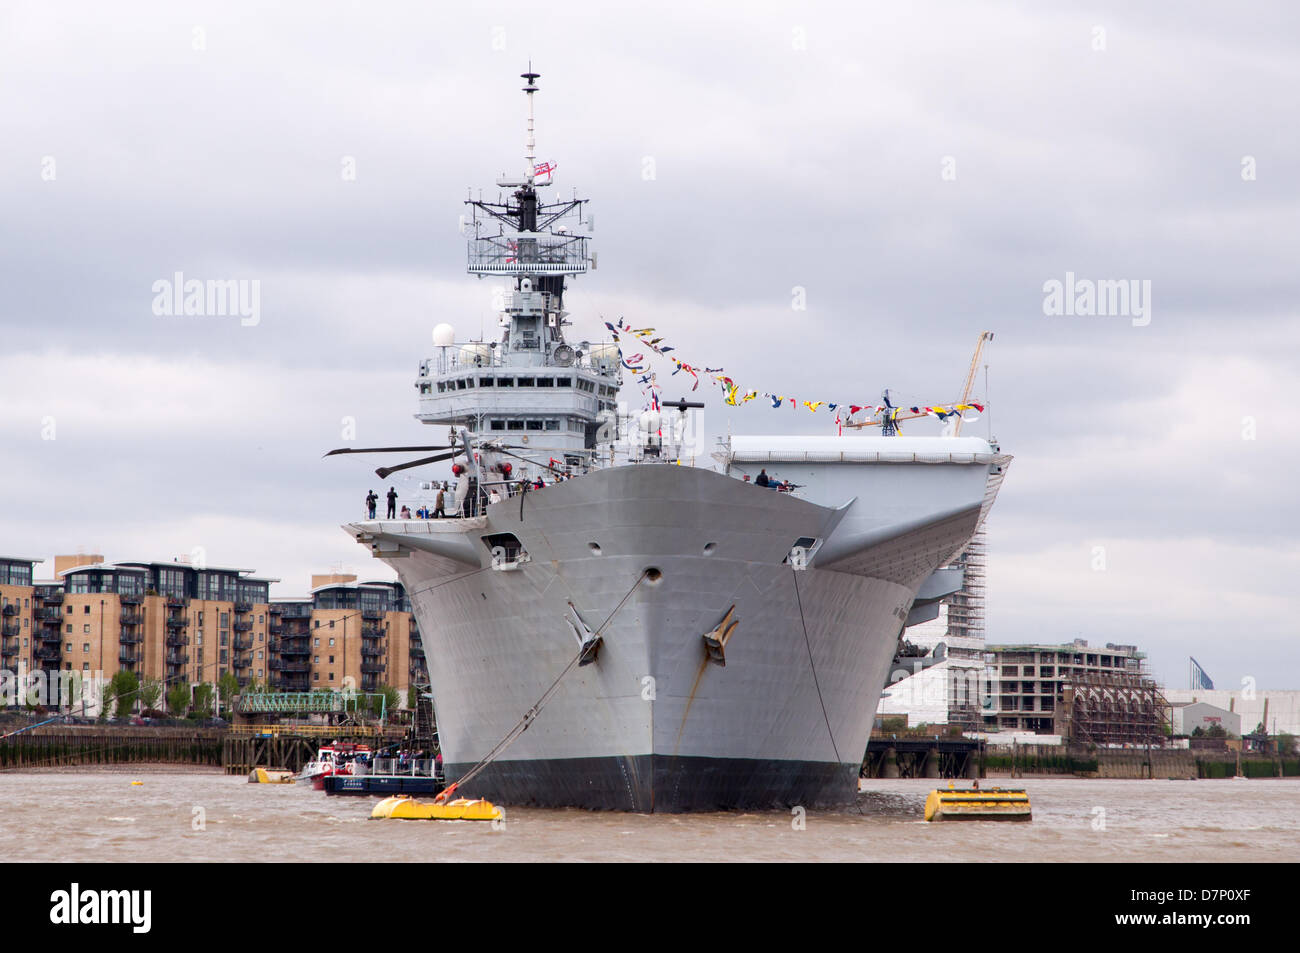 The River Thames, nr Greenwich, London, UK. 11th May 2013. HMS Illustrious, the Royal Navy's helicopter and Commando carrier, visiting London to commemorate the 70th anniversary of the 'Battle of the Atlantic'. Moored on the River Thames next to Greenwich on Saturday 11th May 2013. Credit: Craig Buchanan /Alamy Live News Stock Photo